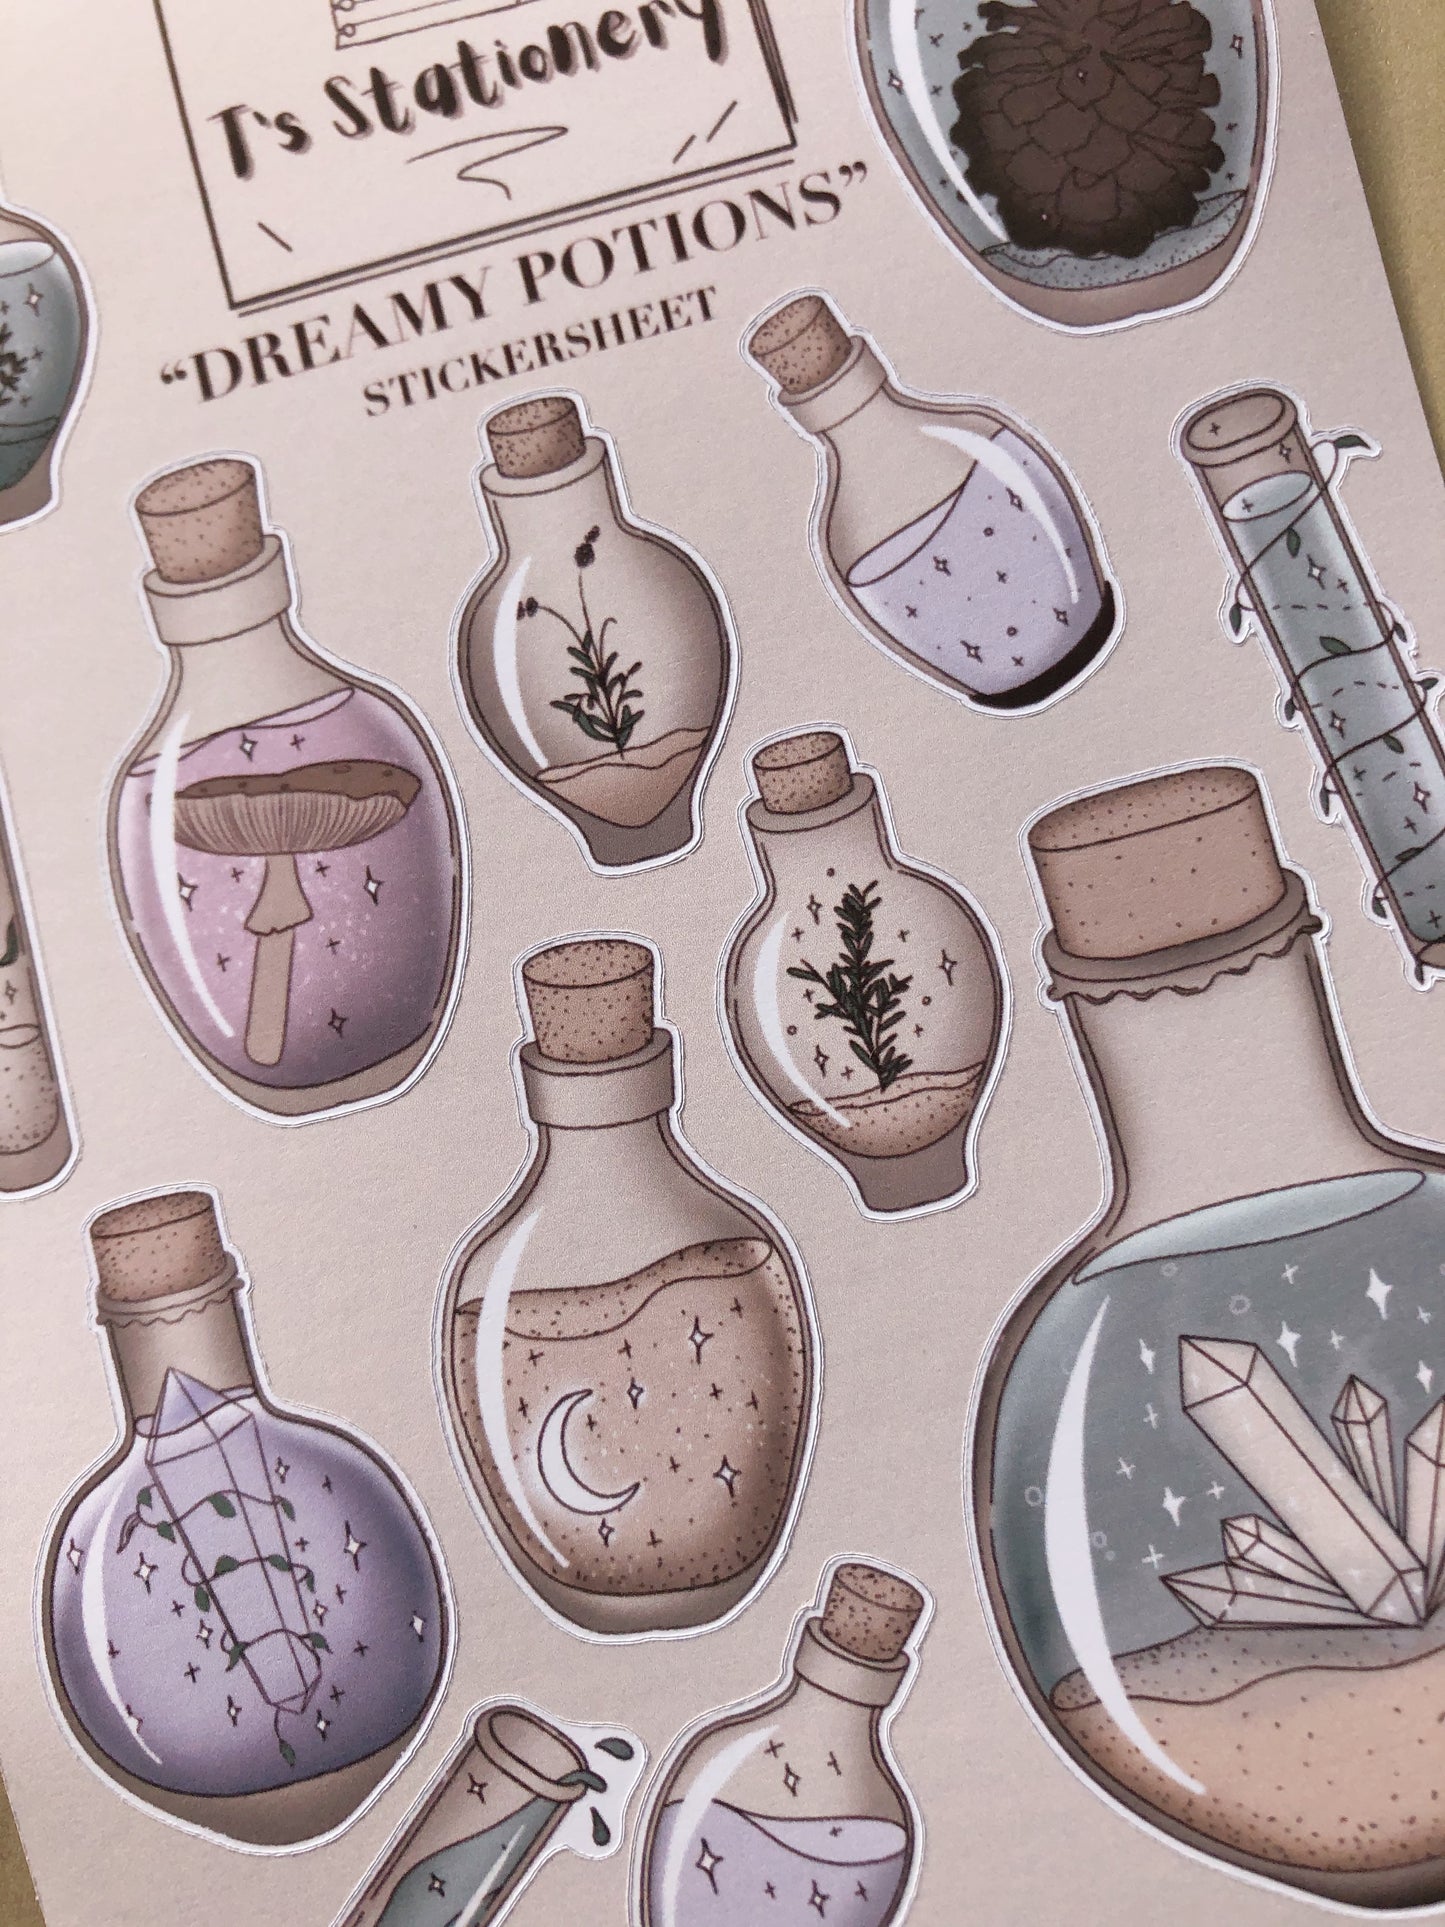 "Potions"